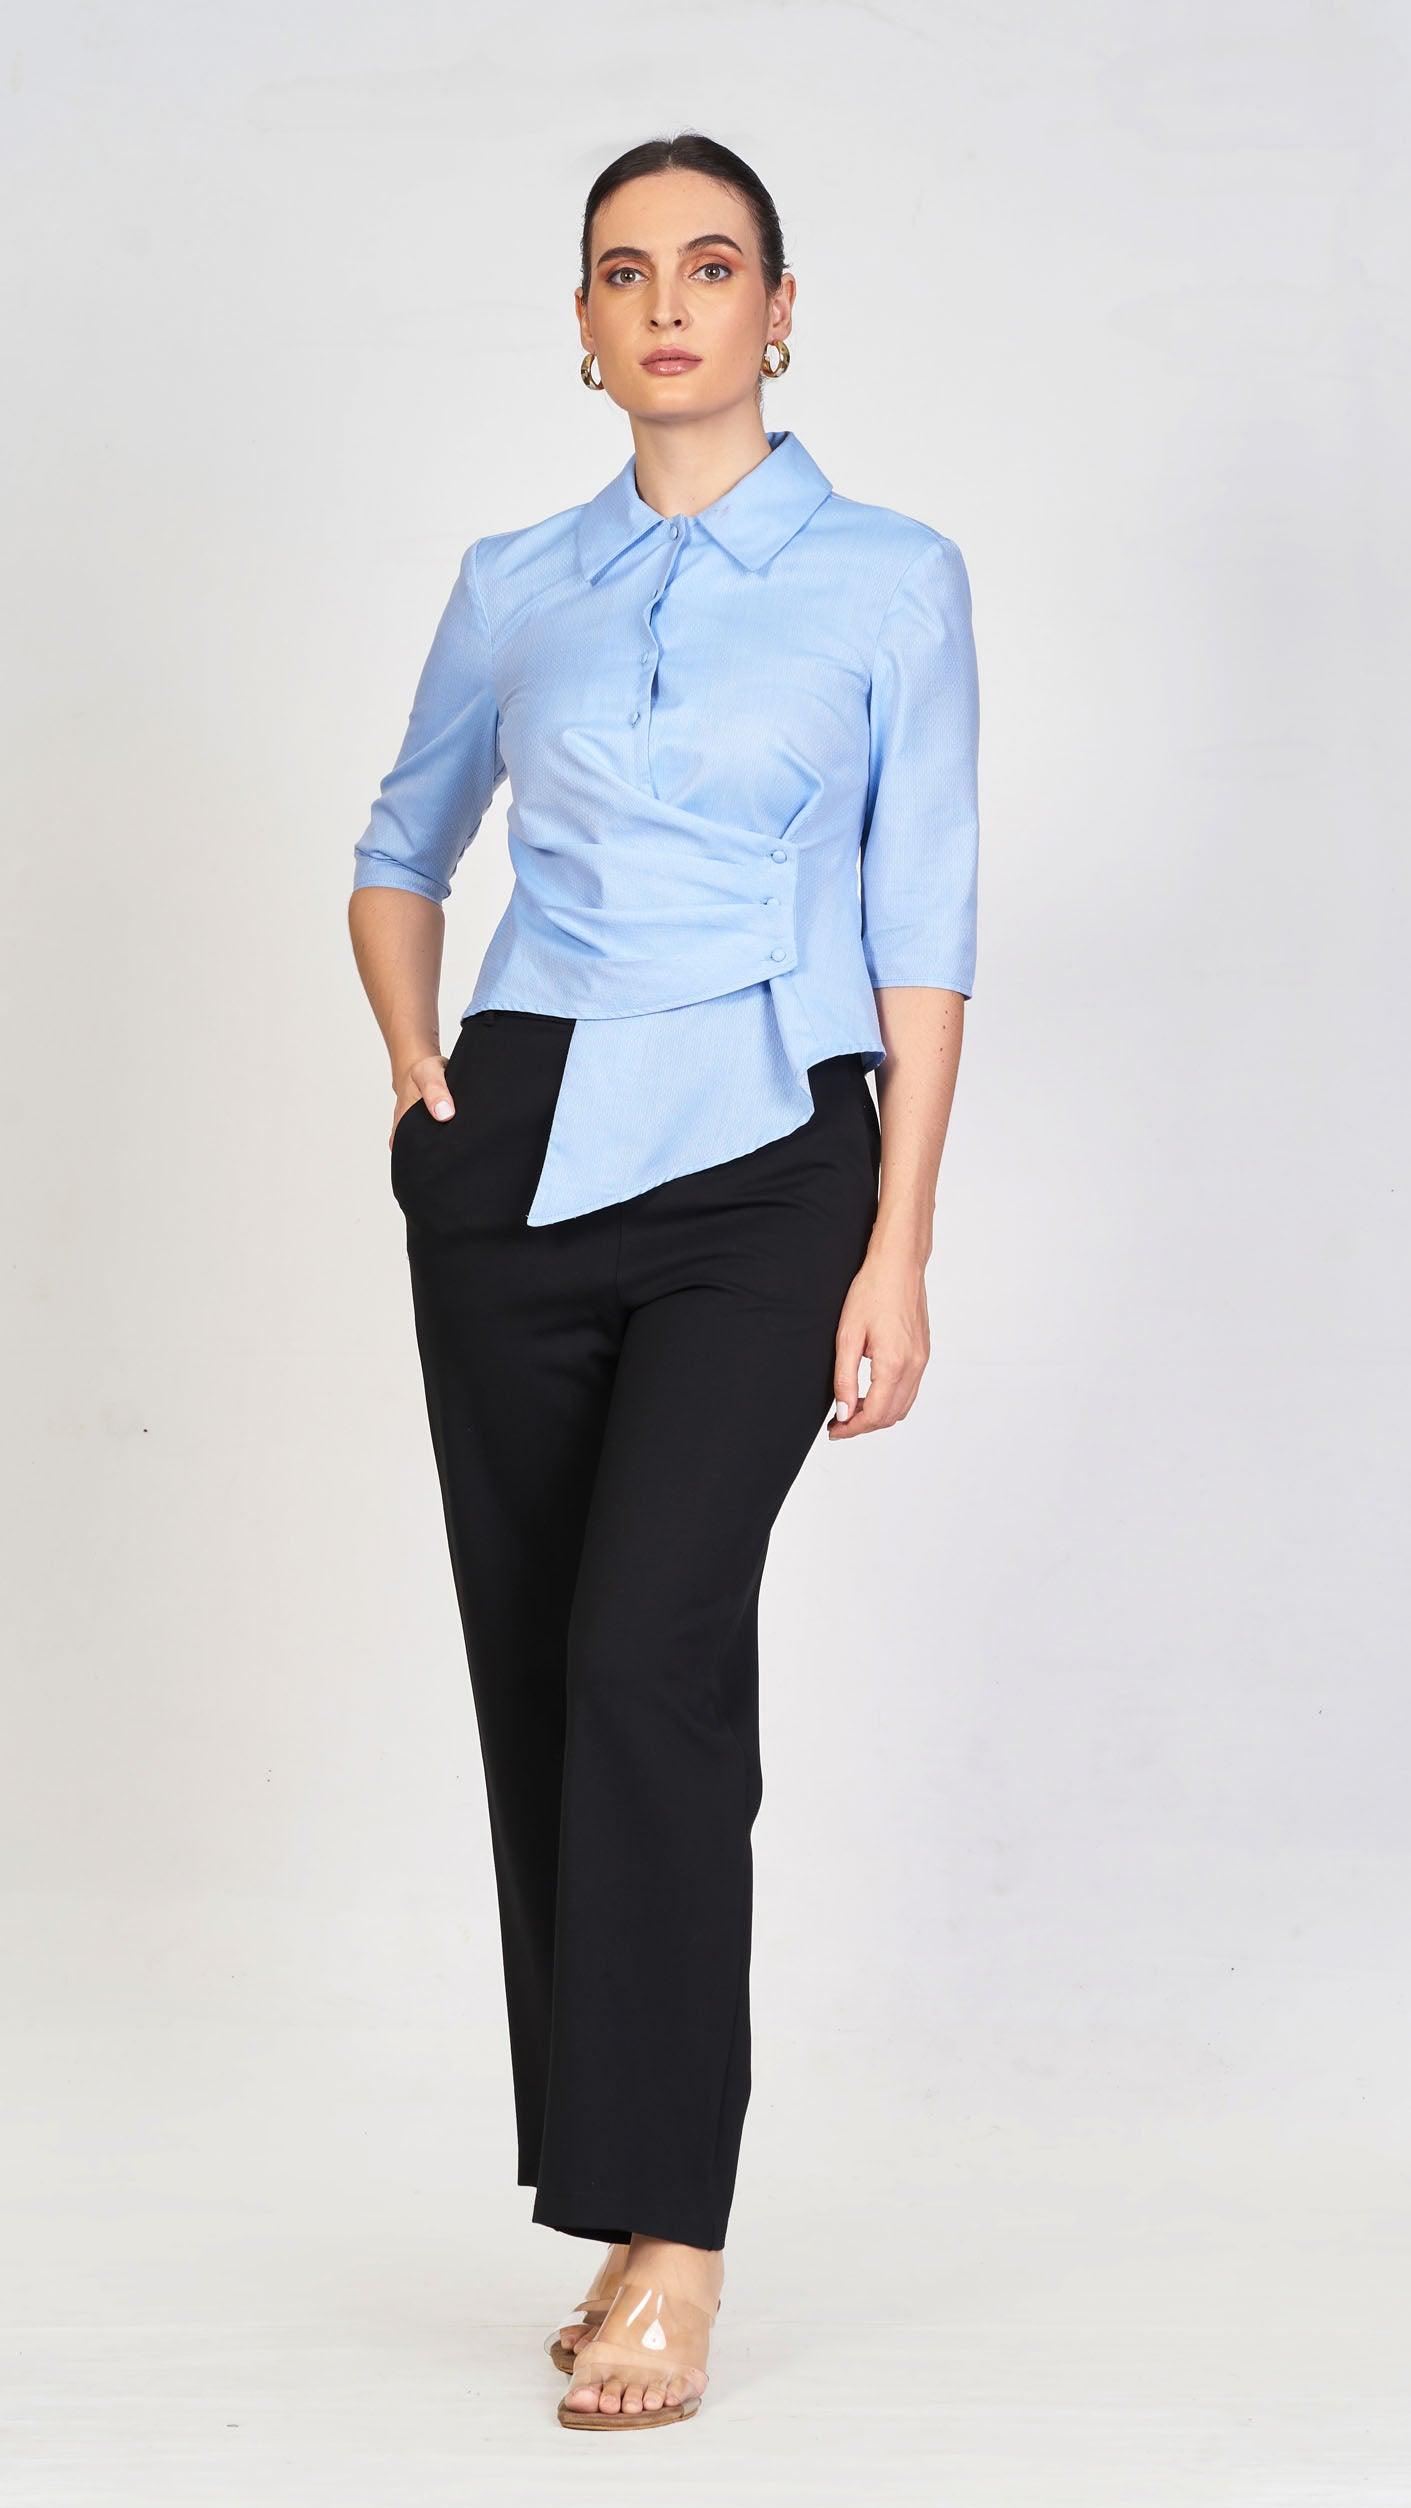 Clinched button detail top - Avirate Sri Lanka